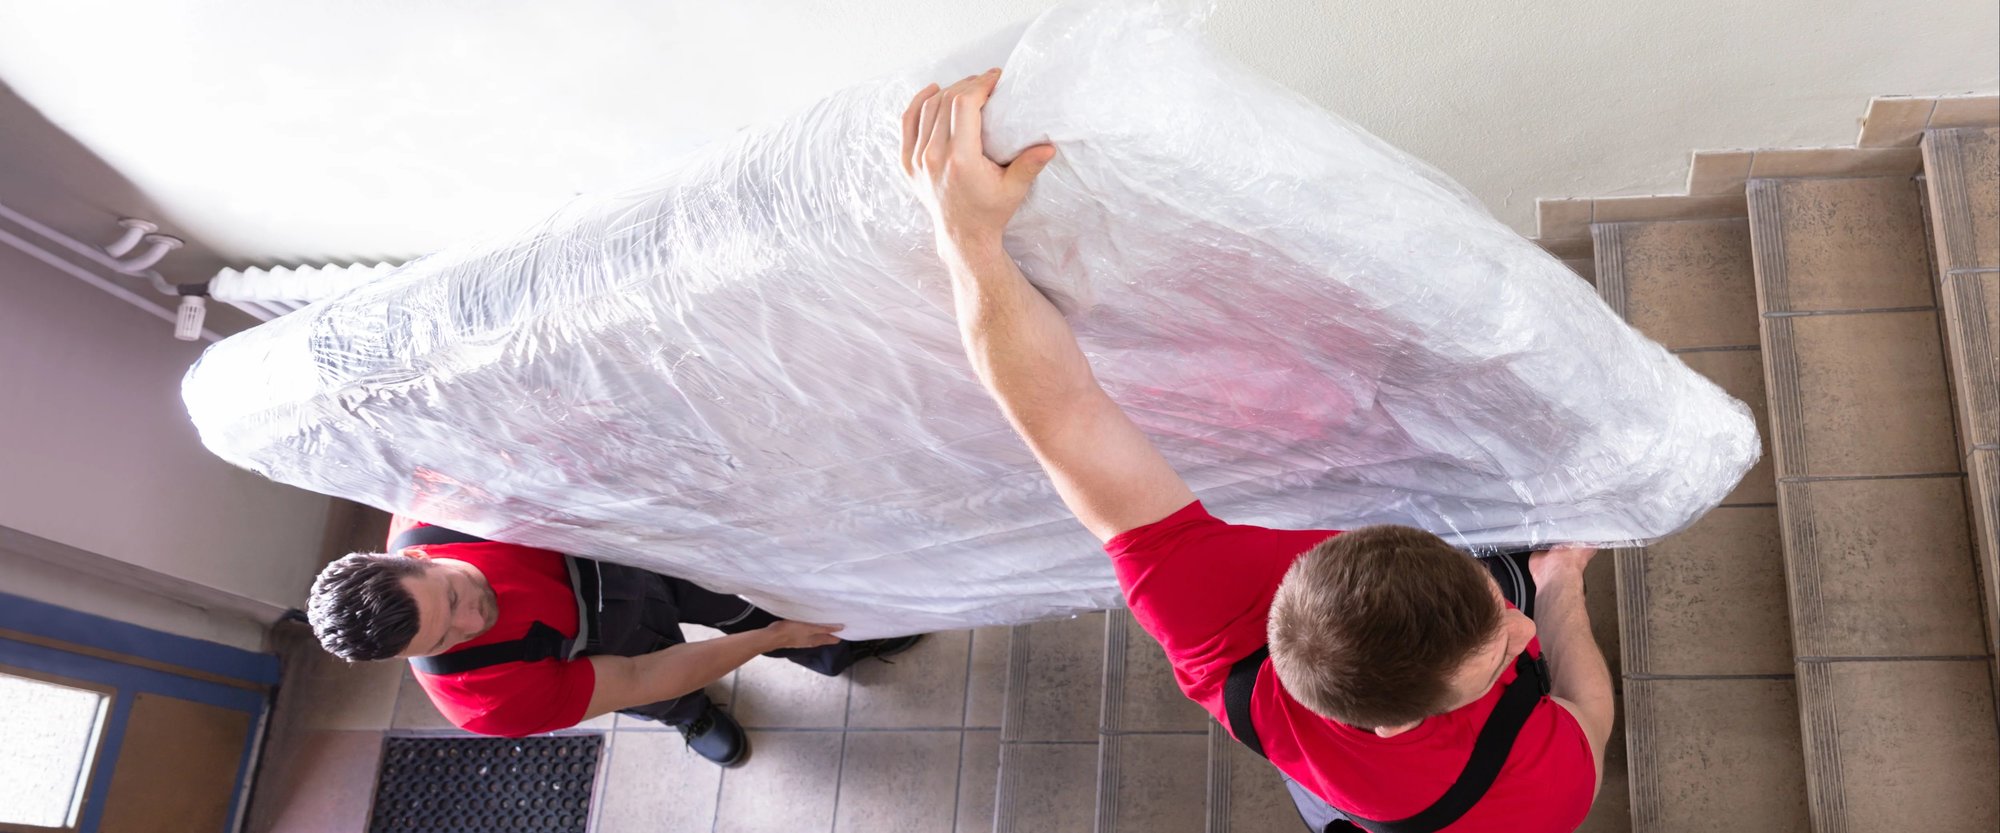 Movers carrying a mattress wrapped in plastic up the stairs